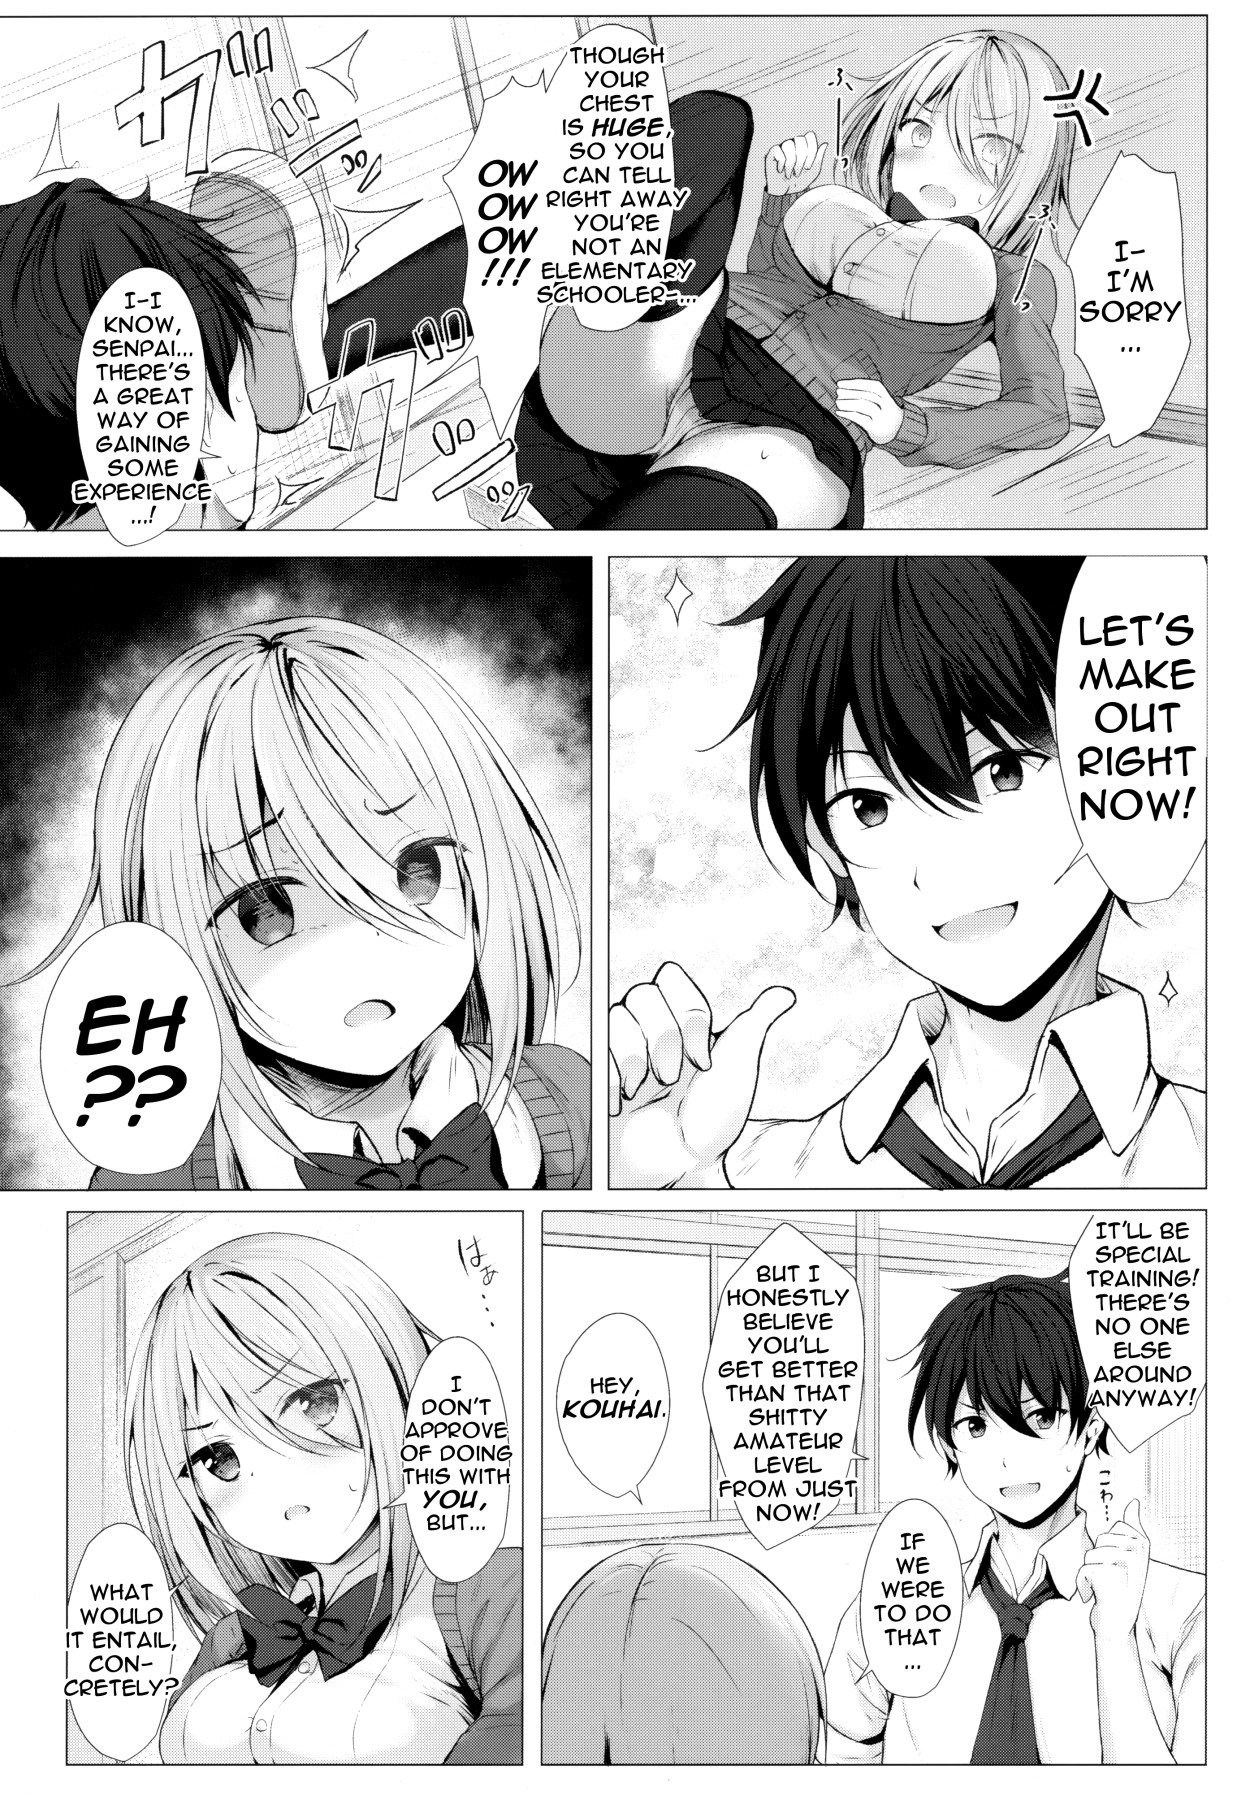 Hentai Manga Comic-A Case Of My Loli Being Small But Big-Read-3